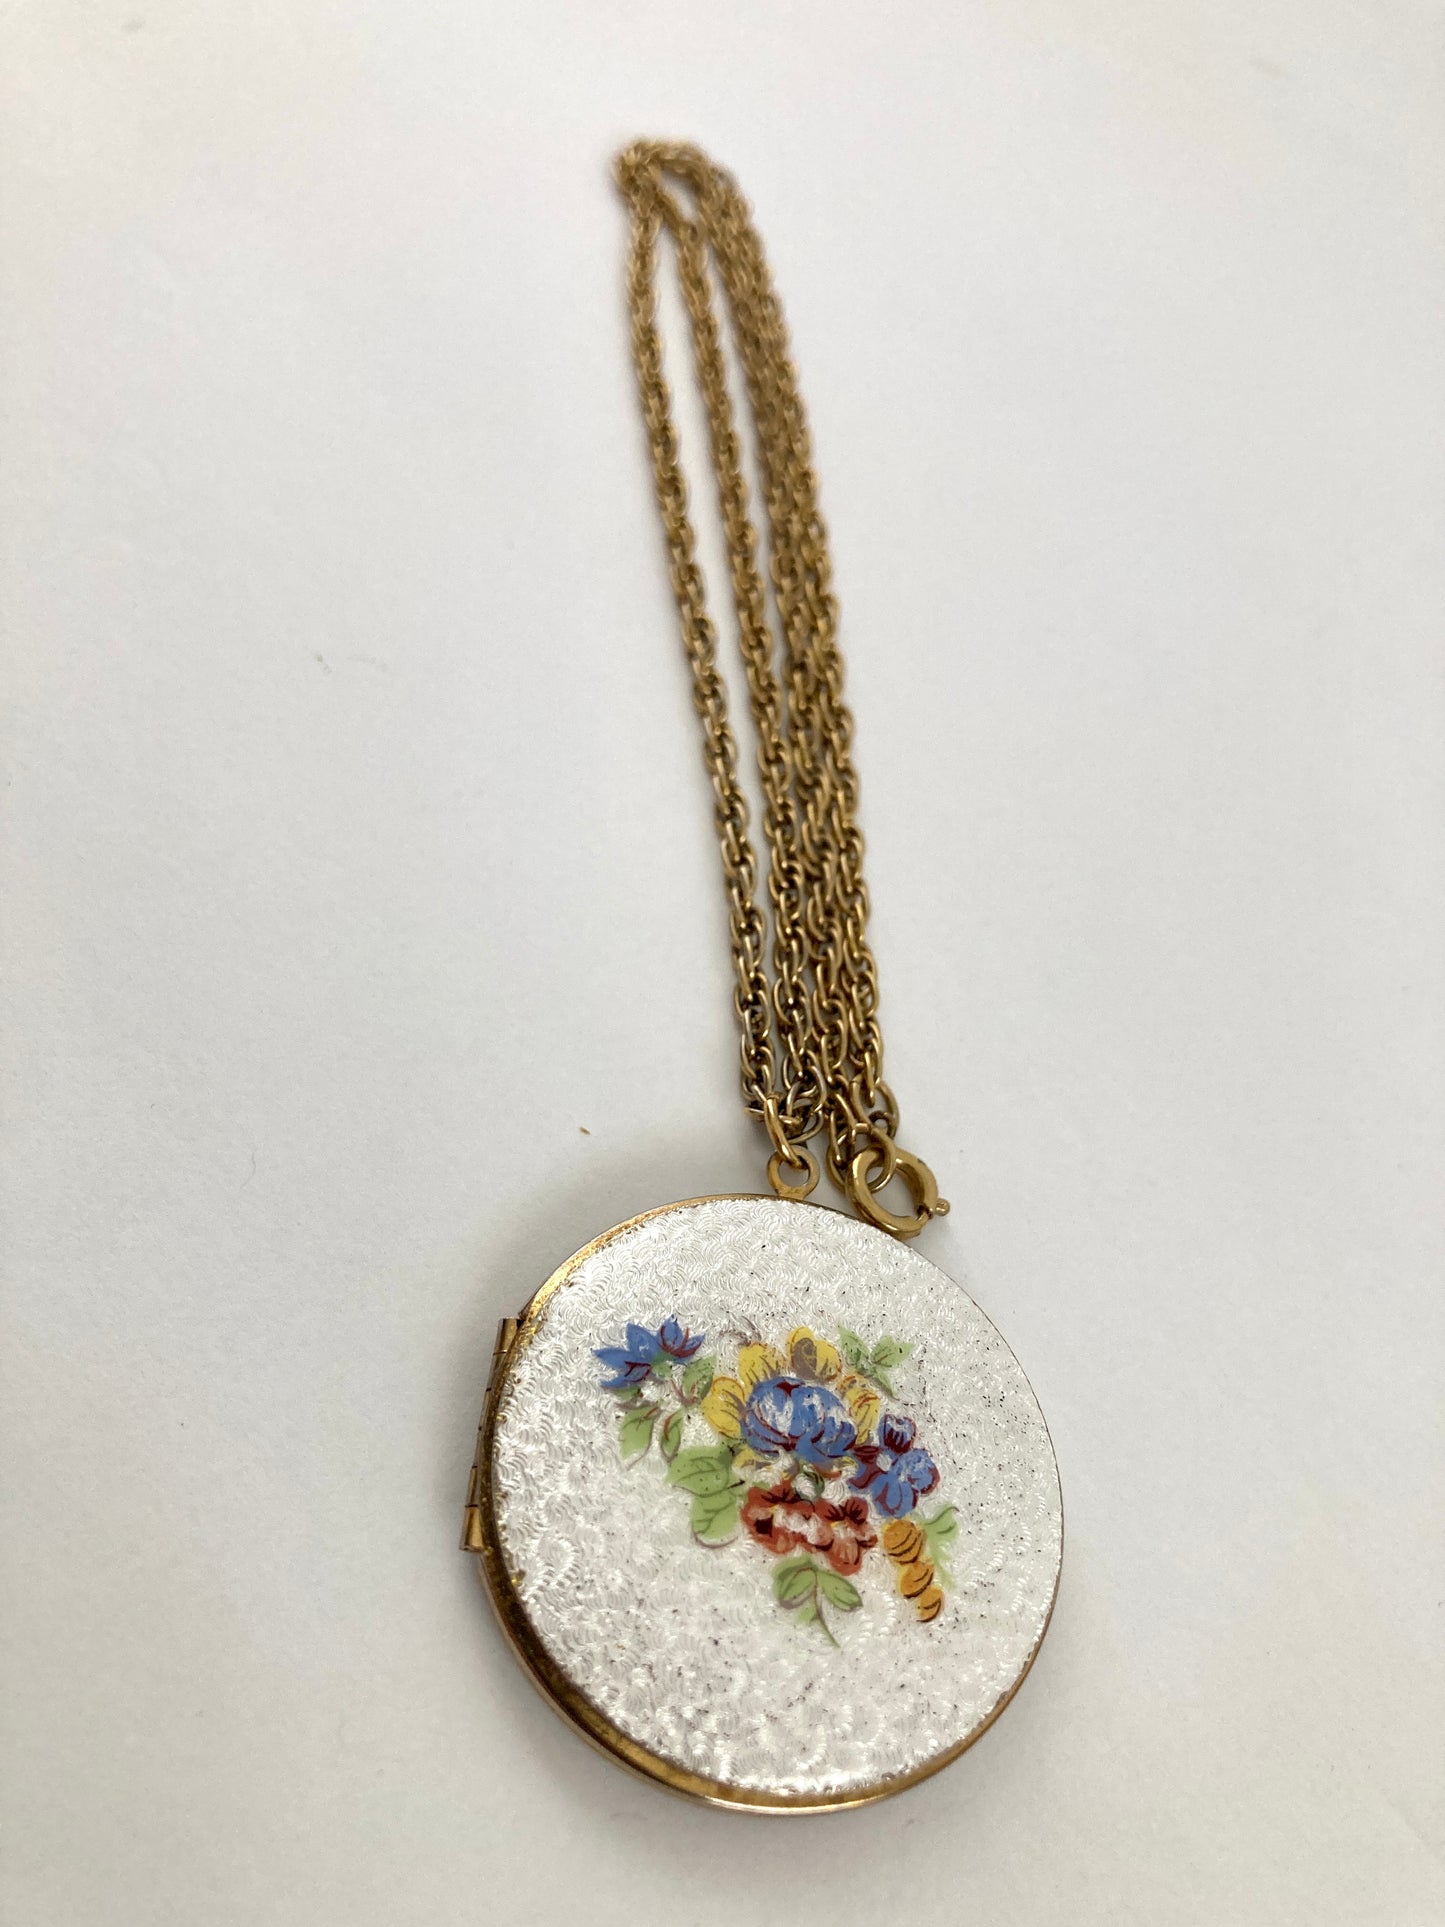 1960s Guilloche Locket with Flowers